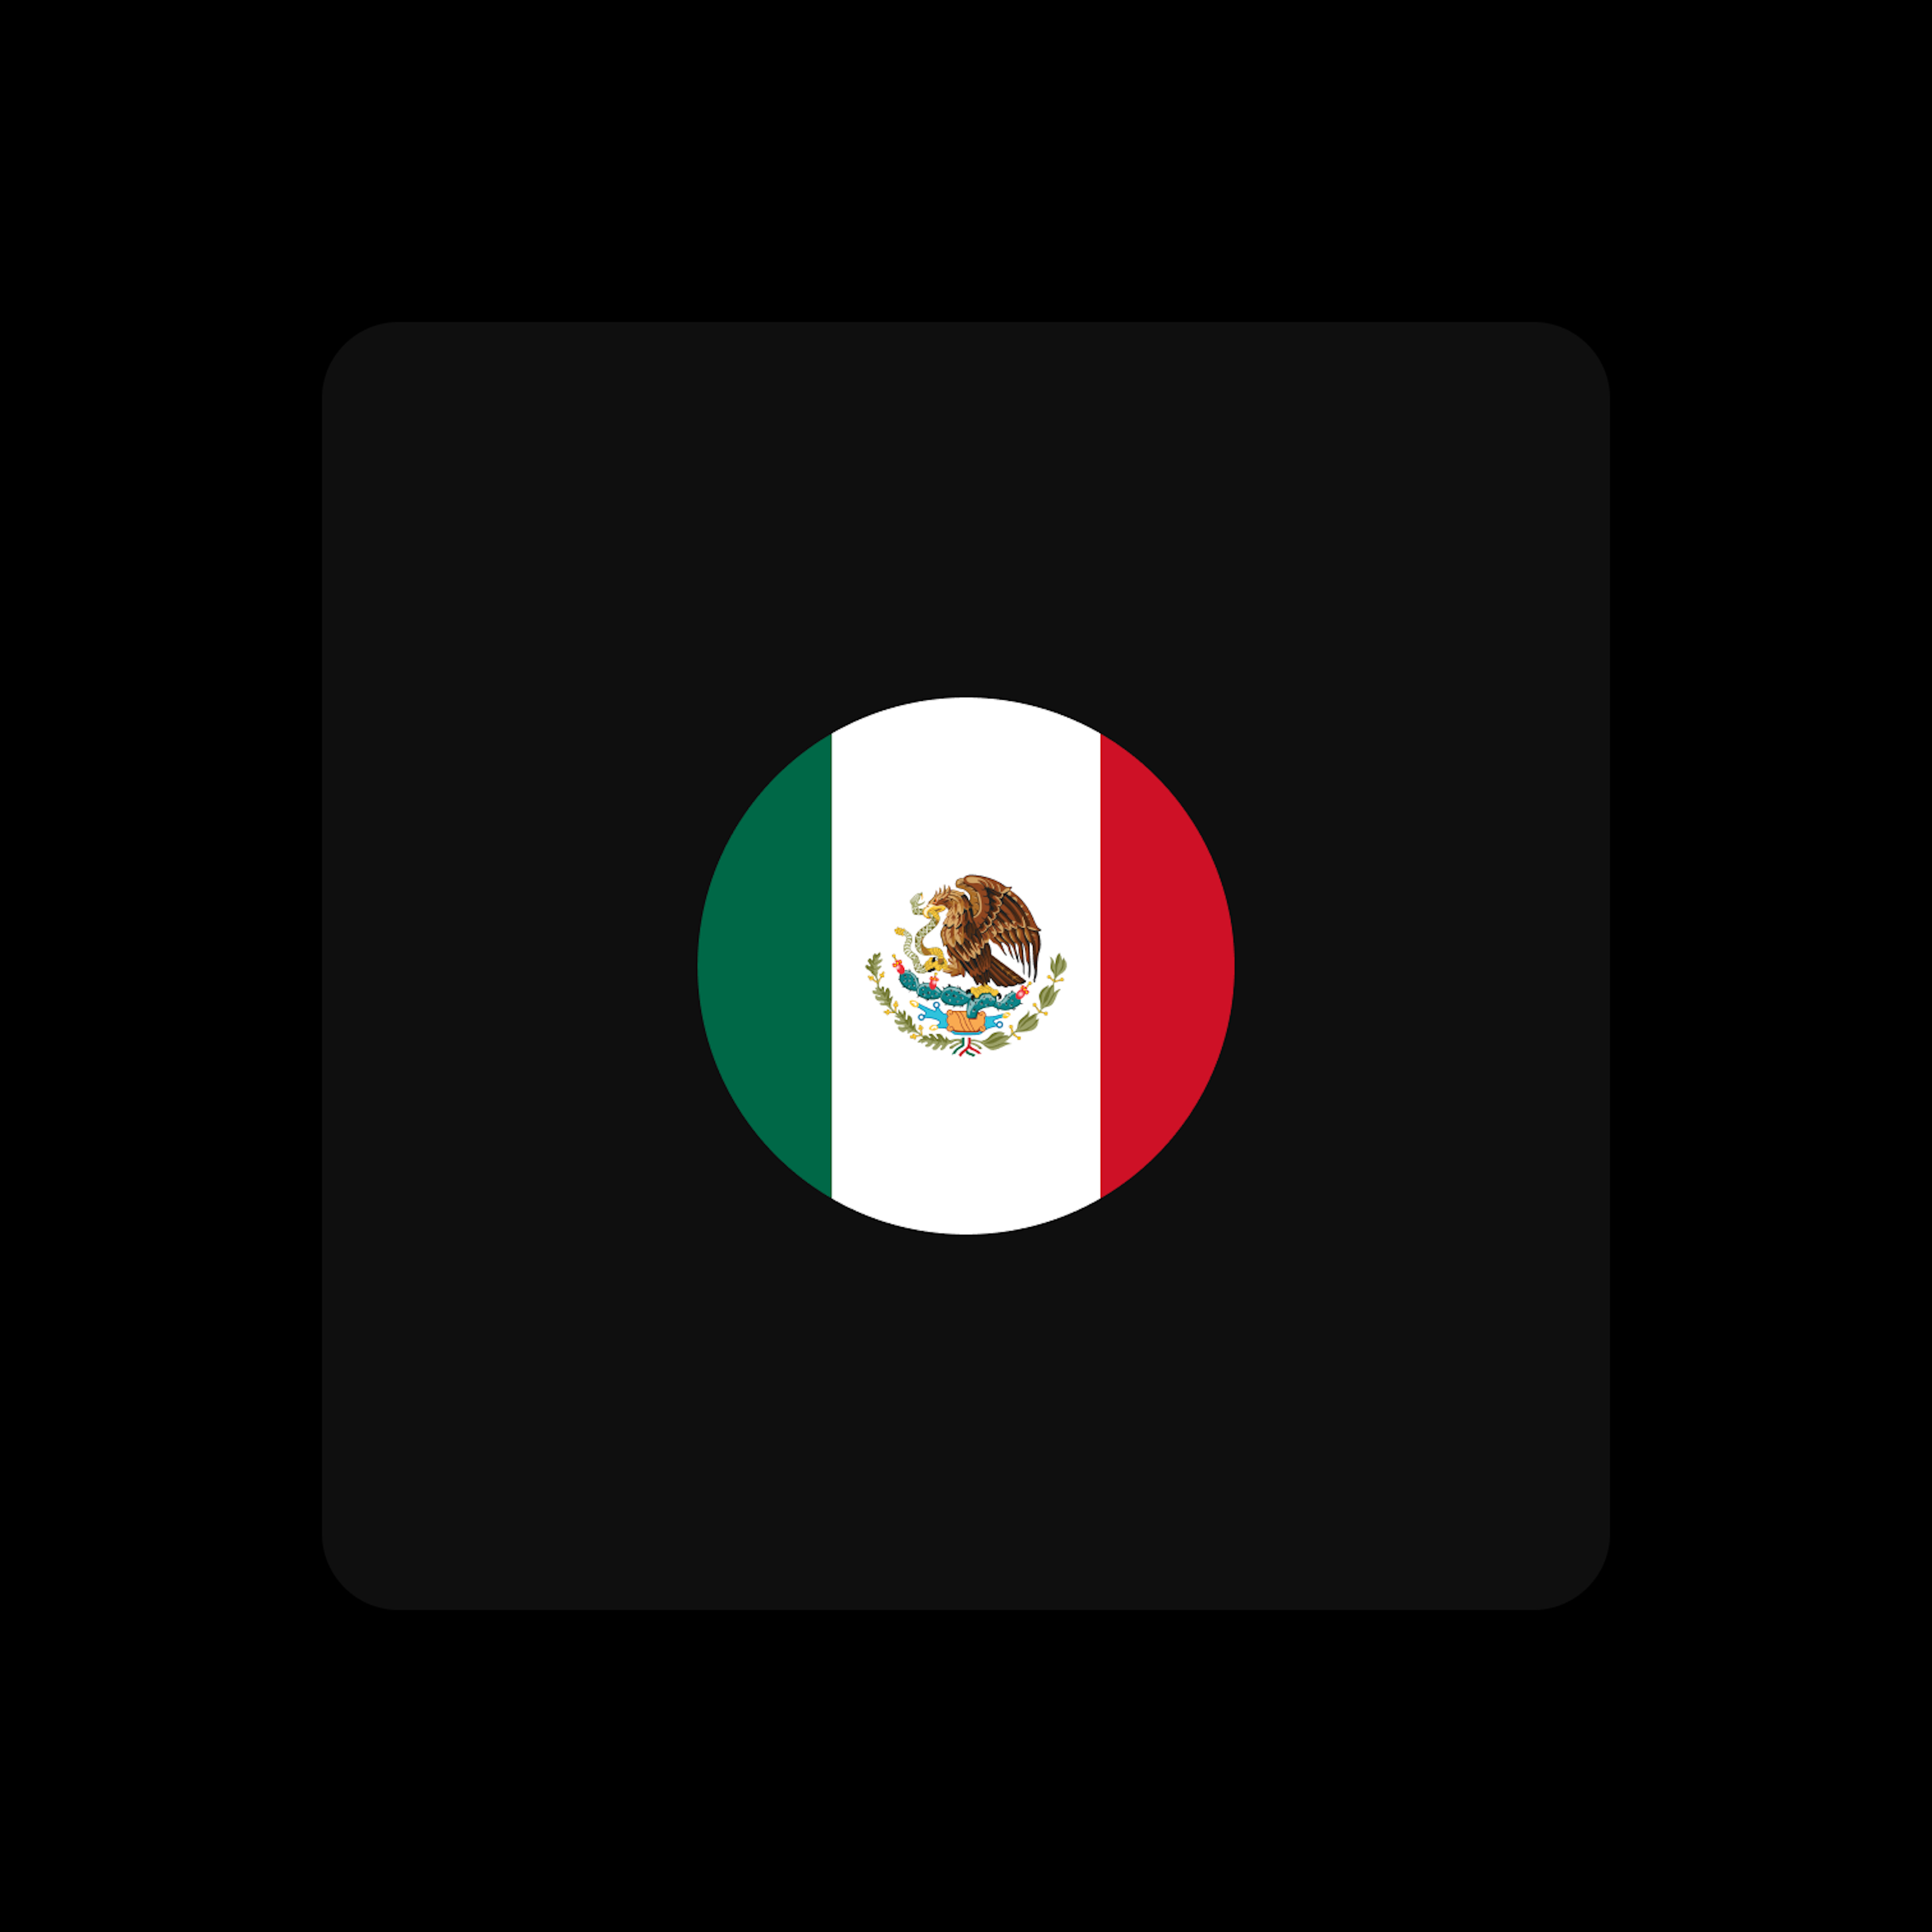 Strike expands 'Send Globally' enabling cross-border payments from the U.S. to Mexico